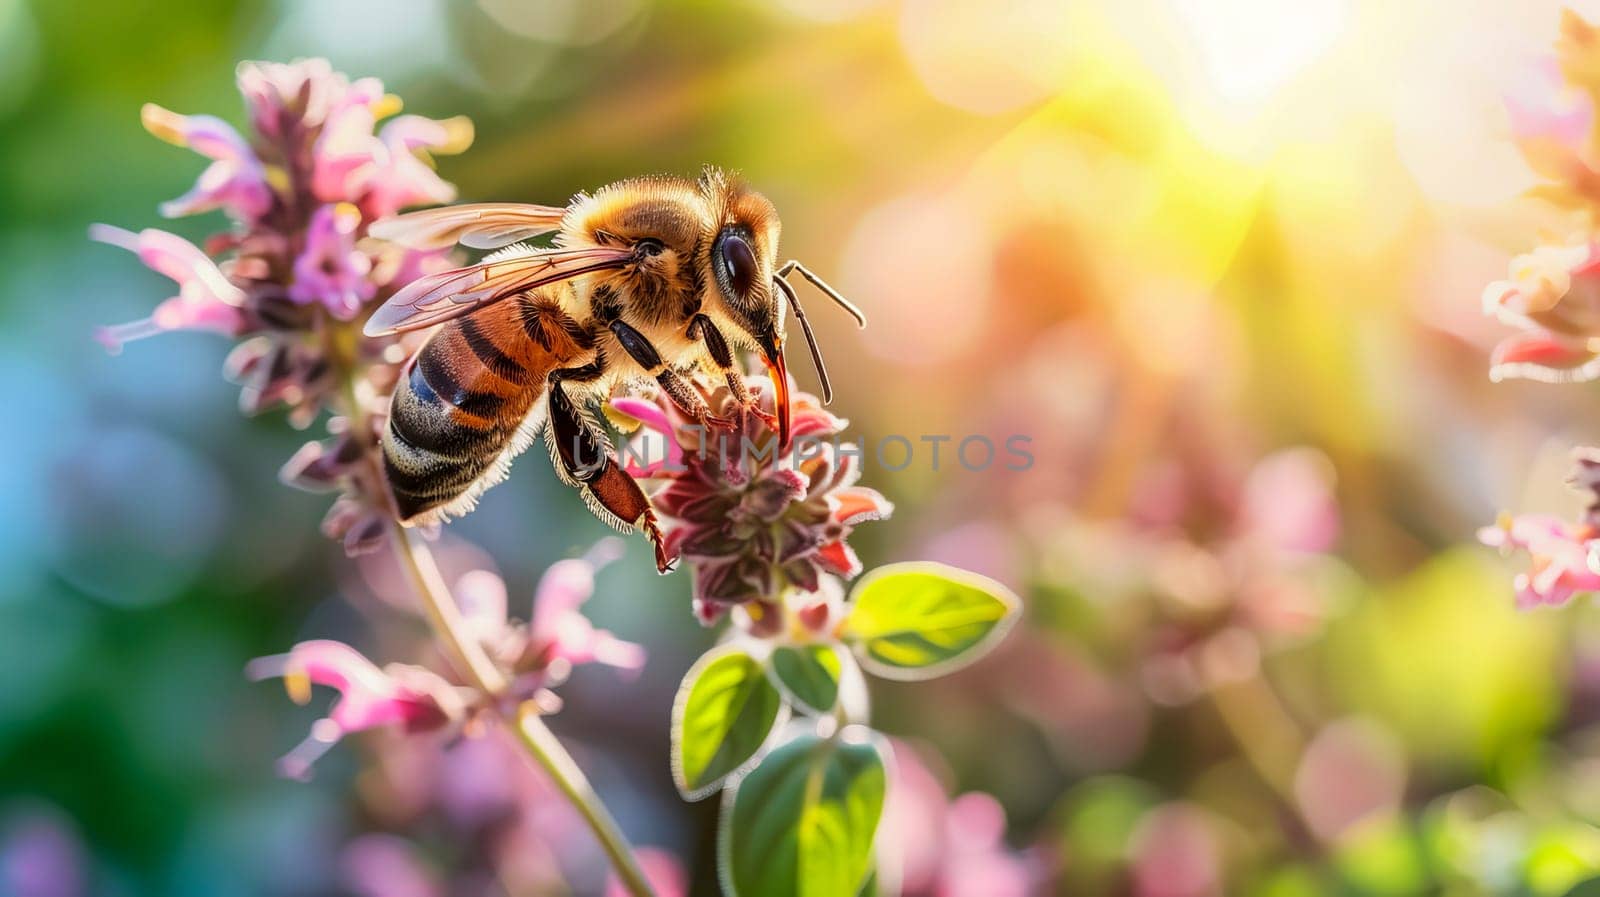 A honey bee collects nectar from oregano flowers in a garden. by OlgaGubskaya